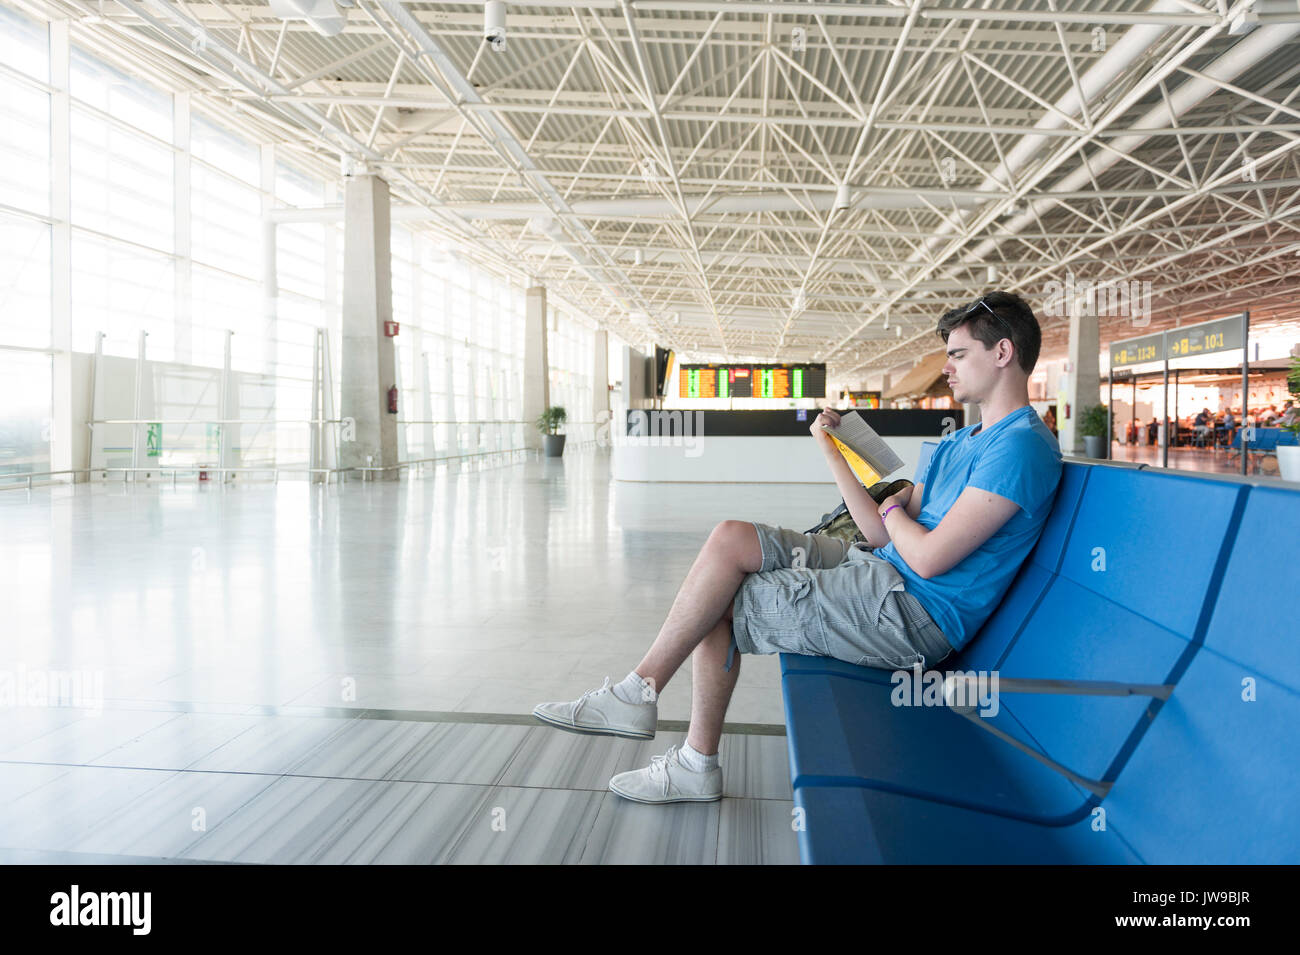 young man waiting in the departure lounge of an airport reading a book Stock Photo